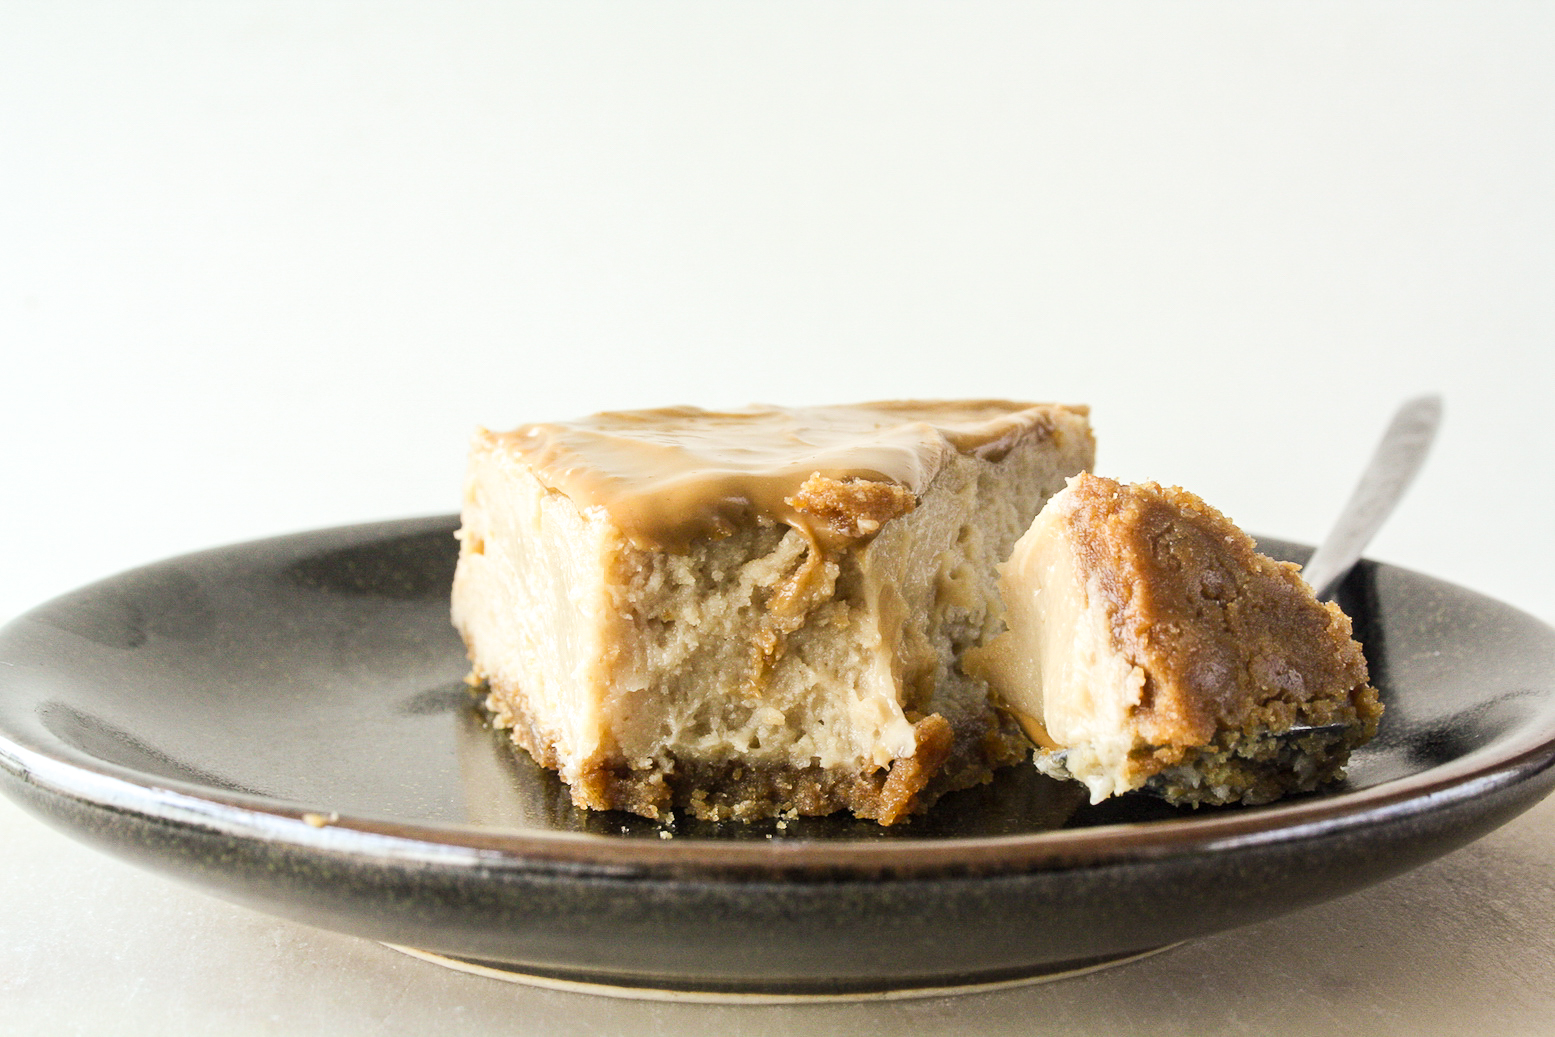 Rich and creamy baked cookie butter cheesecake on a Biscoff cookie base!